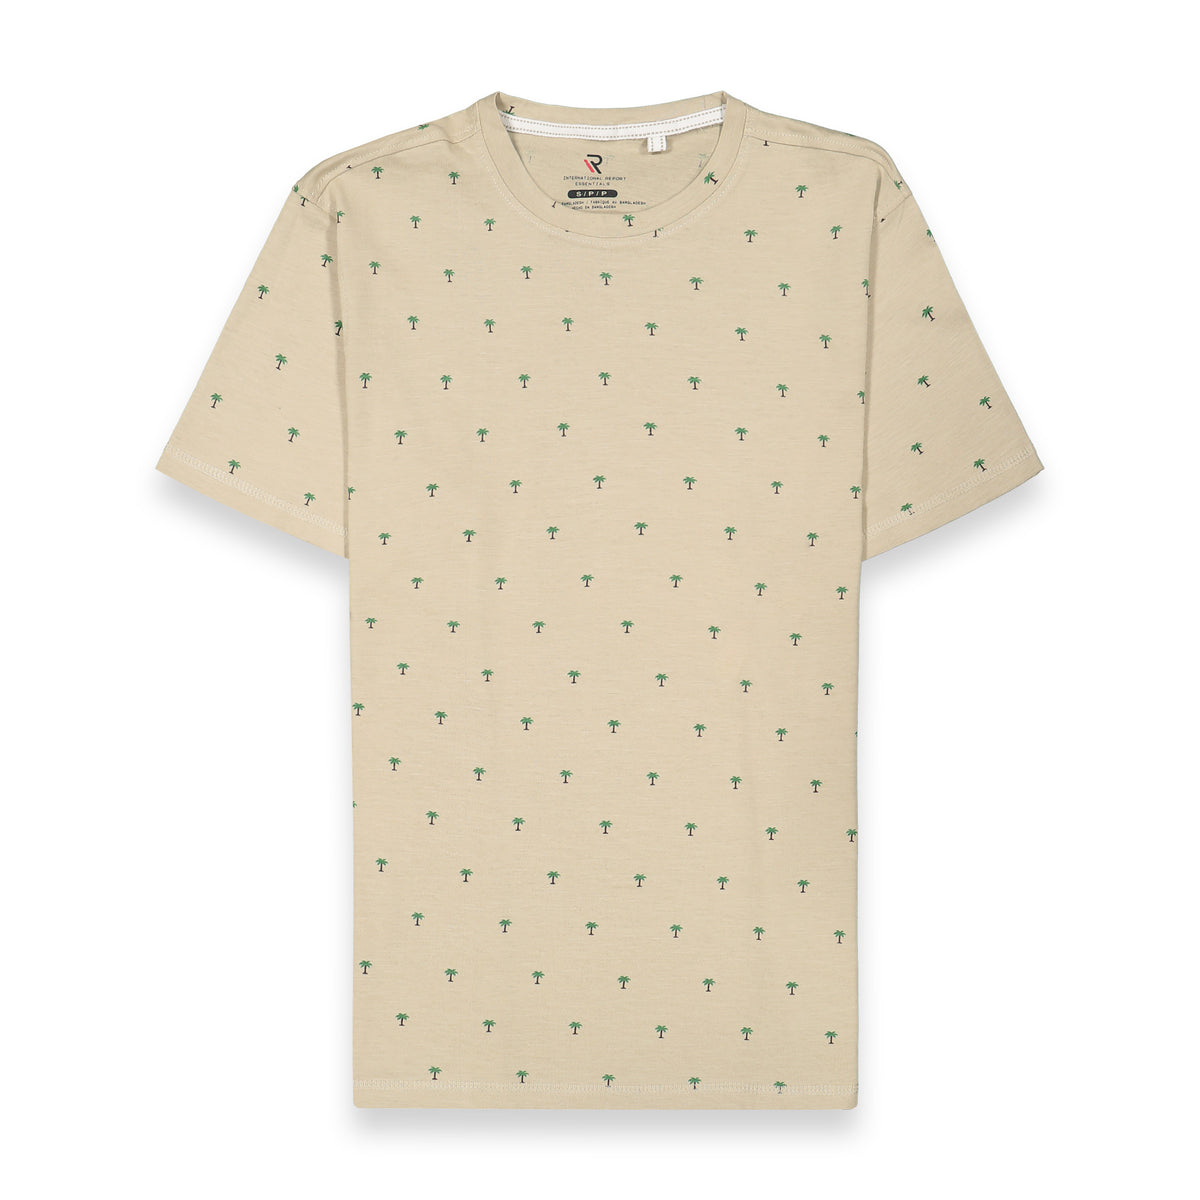 Front View of Short Sleeve Shirt with Palm Tree Print in Tan